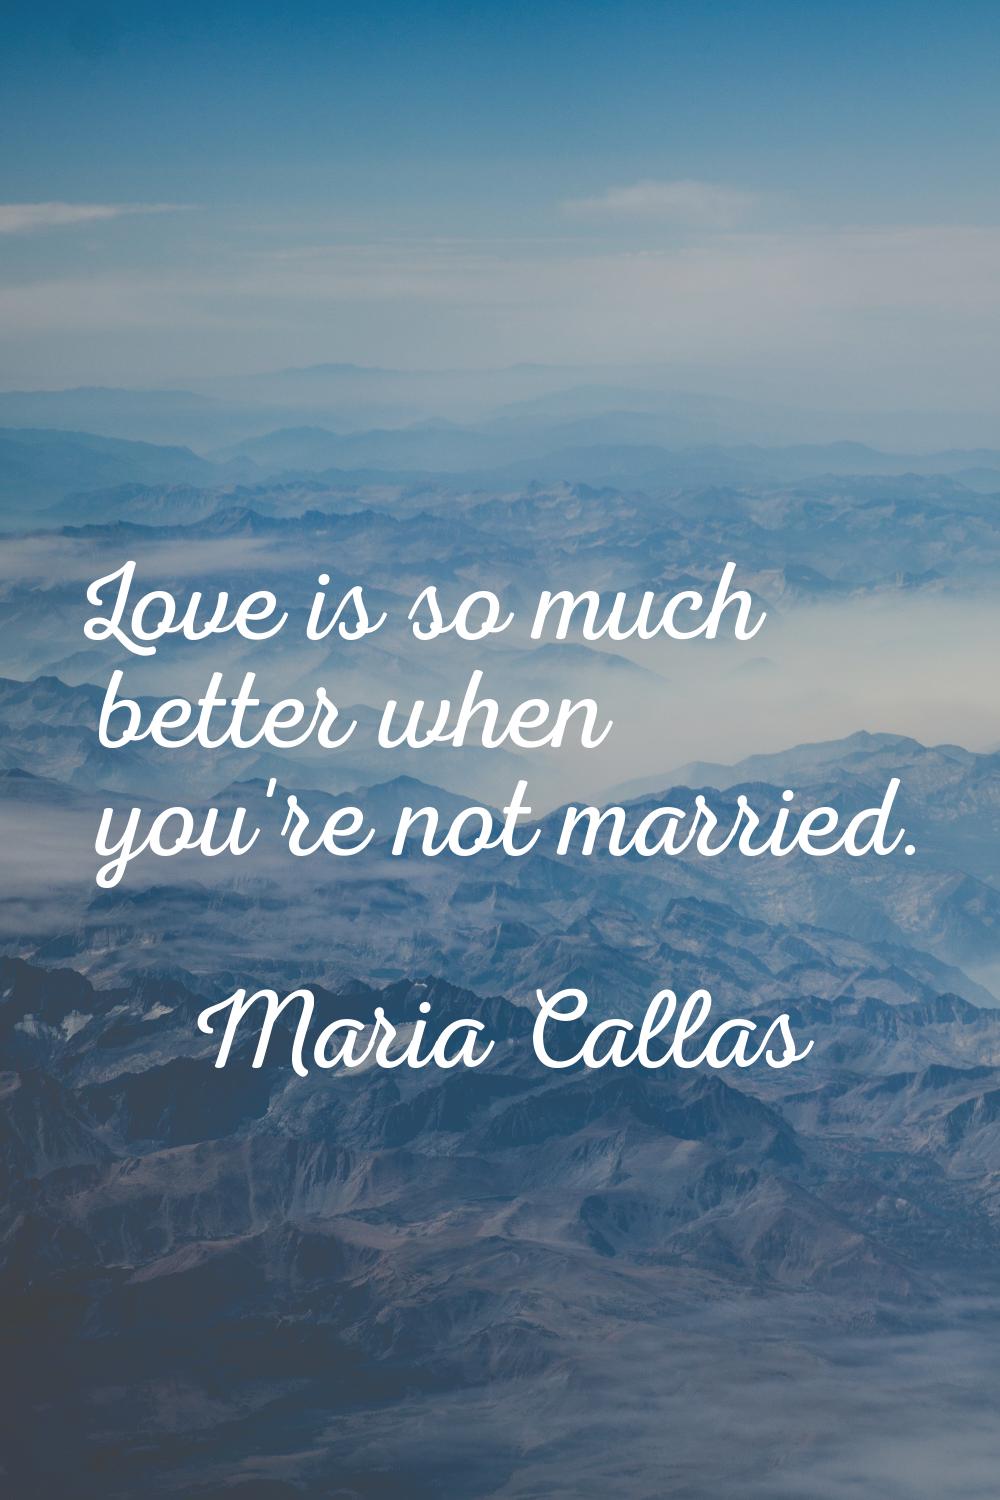 Love is so much better when you're not married.